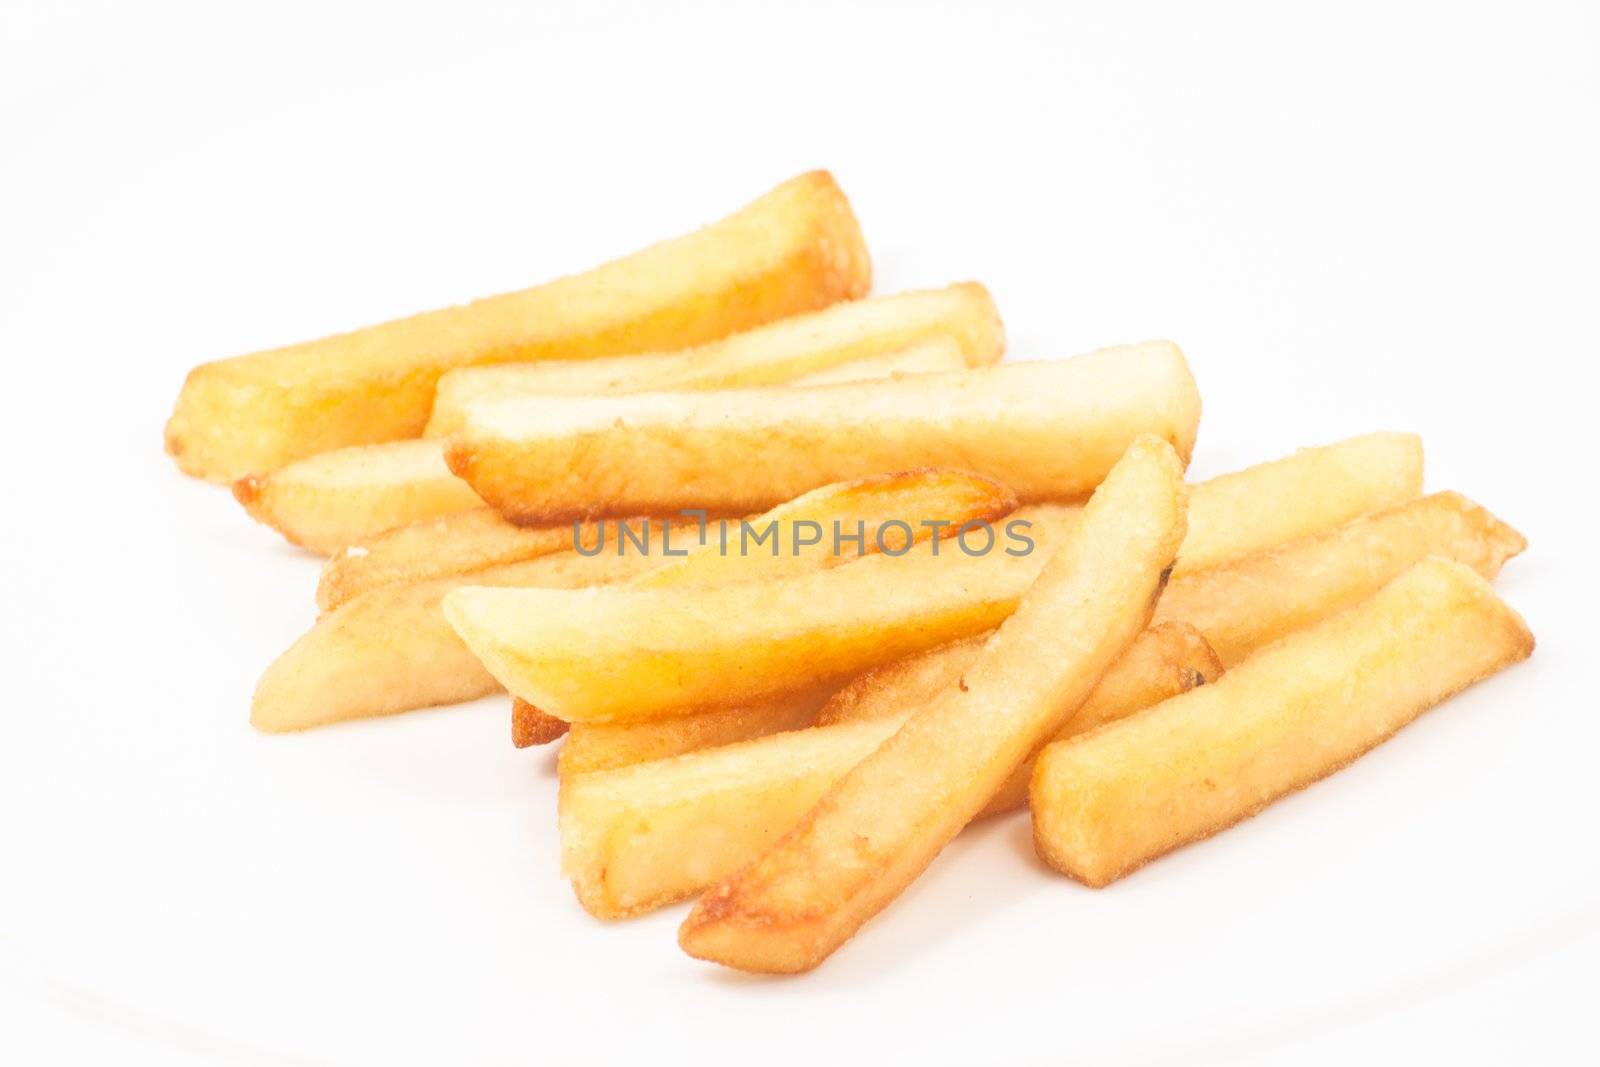 French fries by artemisphoto